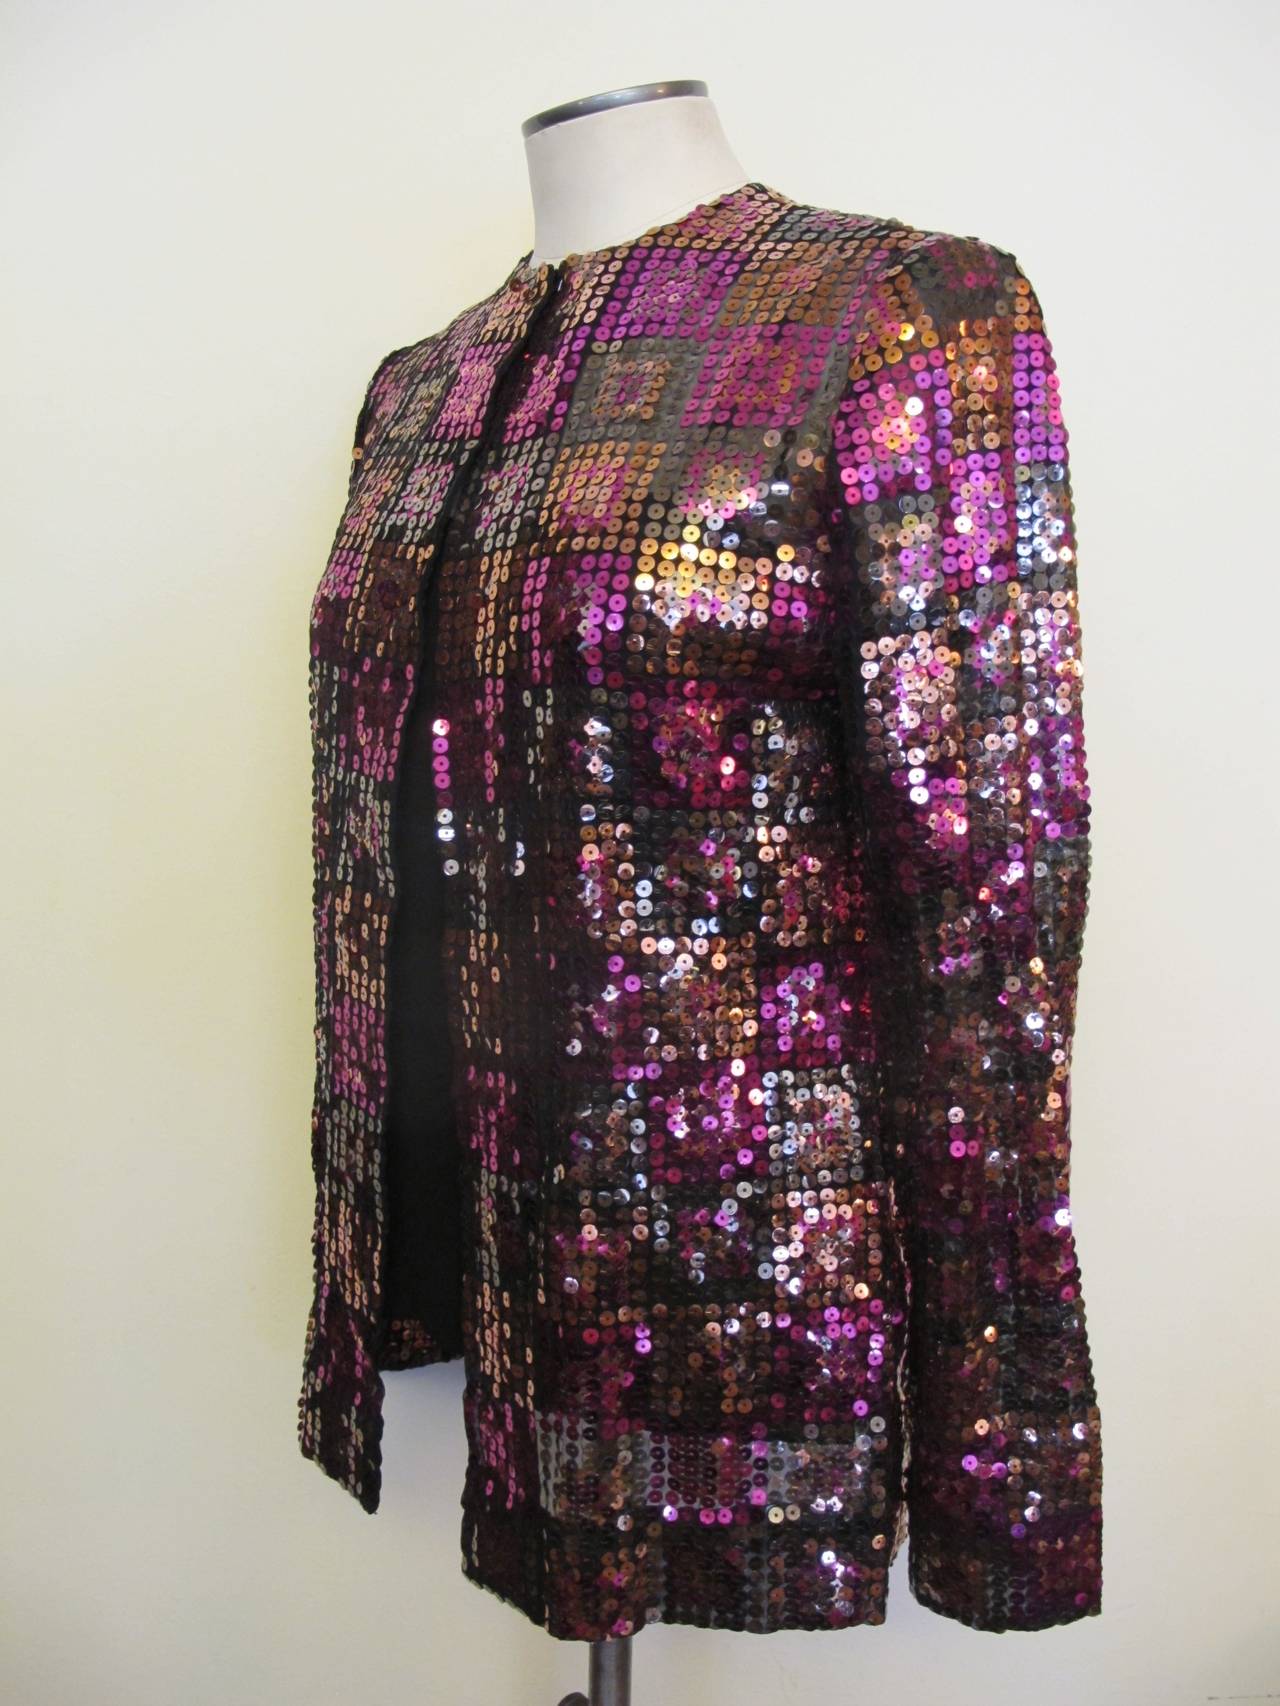 Collectable Adolfo Saks Fifth Avenue Sequin Jacket with closed neck. The sequin colors are pewter, copper and fuchsia. Adolfo was a special gentleman who cherished his clients and his clients adored him.

Shoulder to shoulder measures 14 inches.